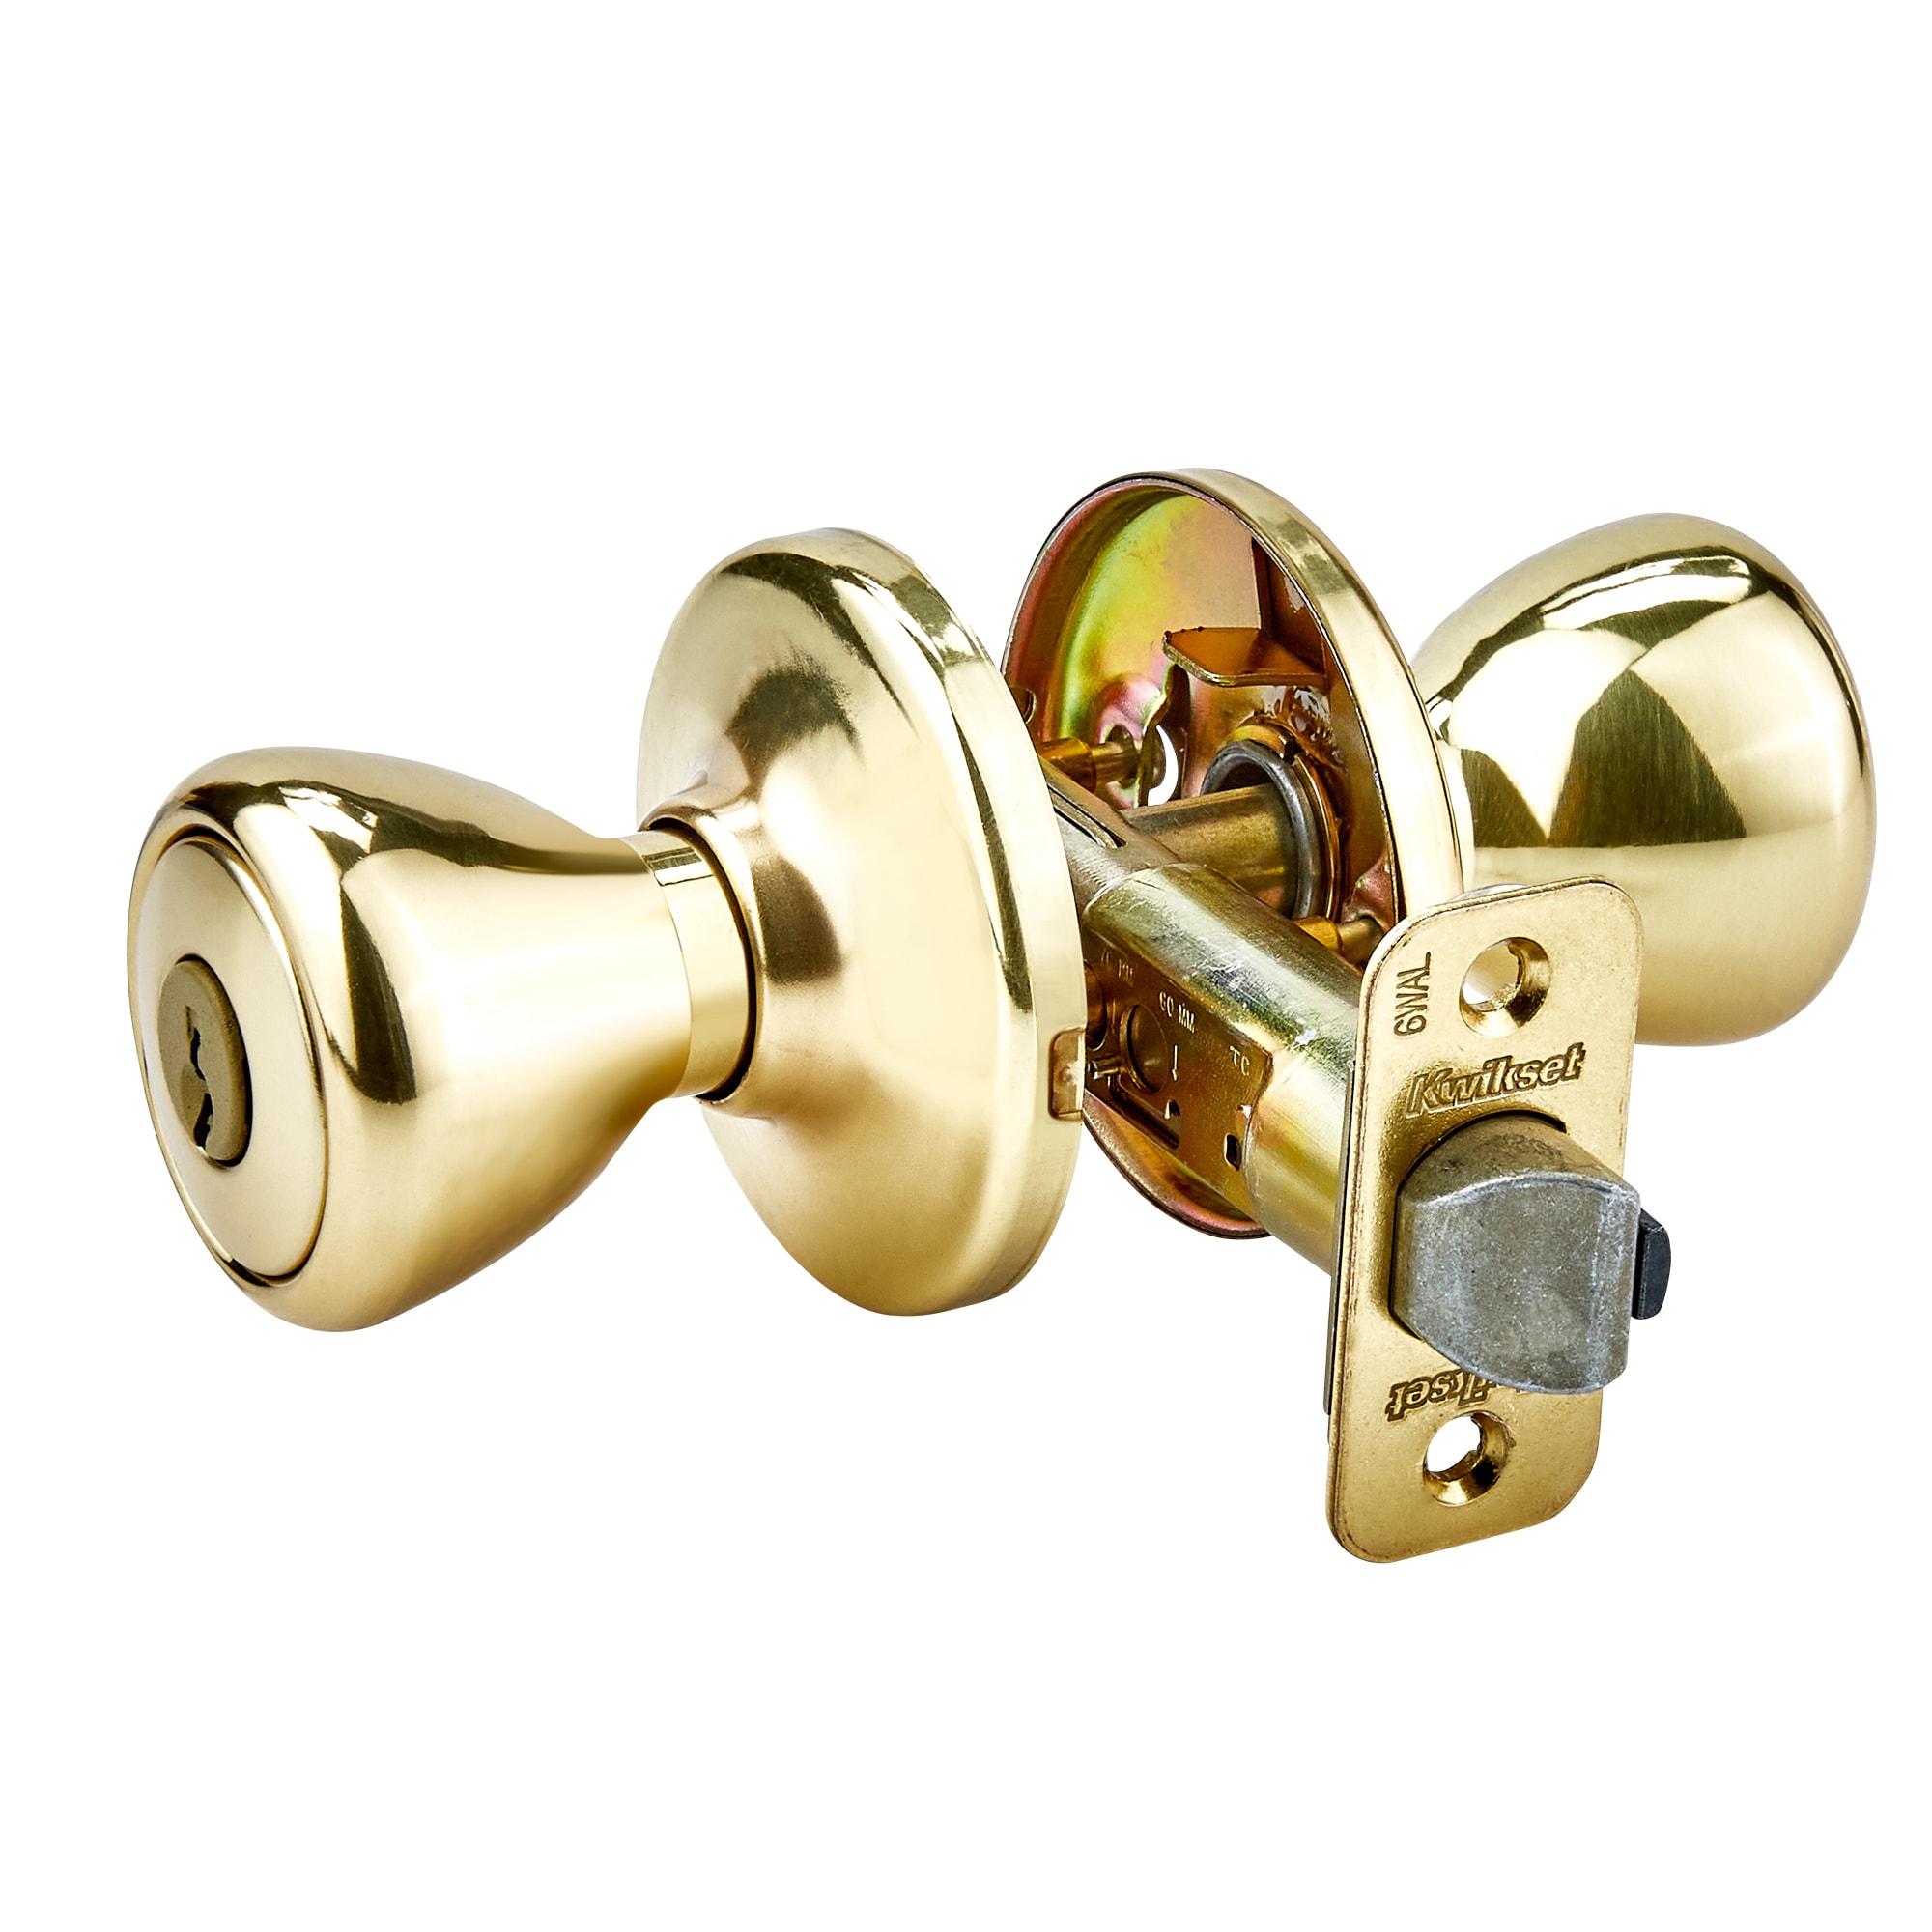 Kwikset Security Tylo Polished Brass Keyed Entry Door Knob at